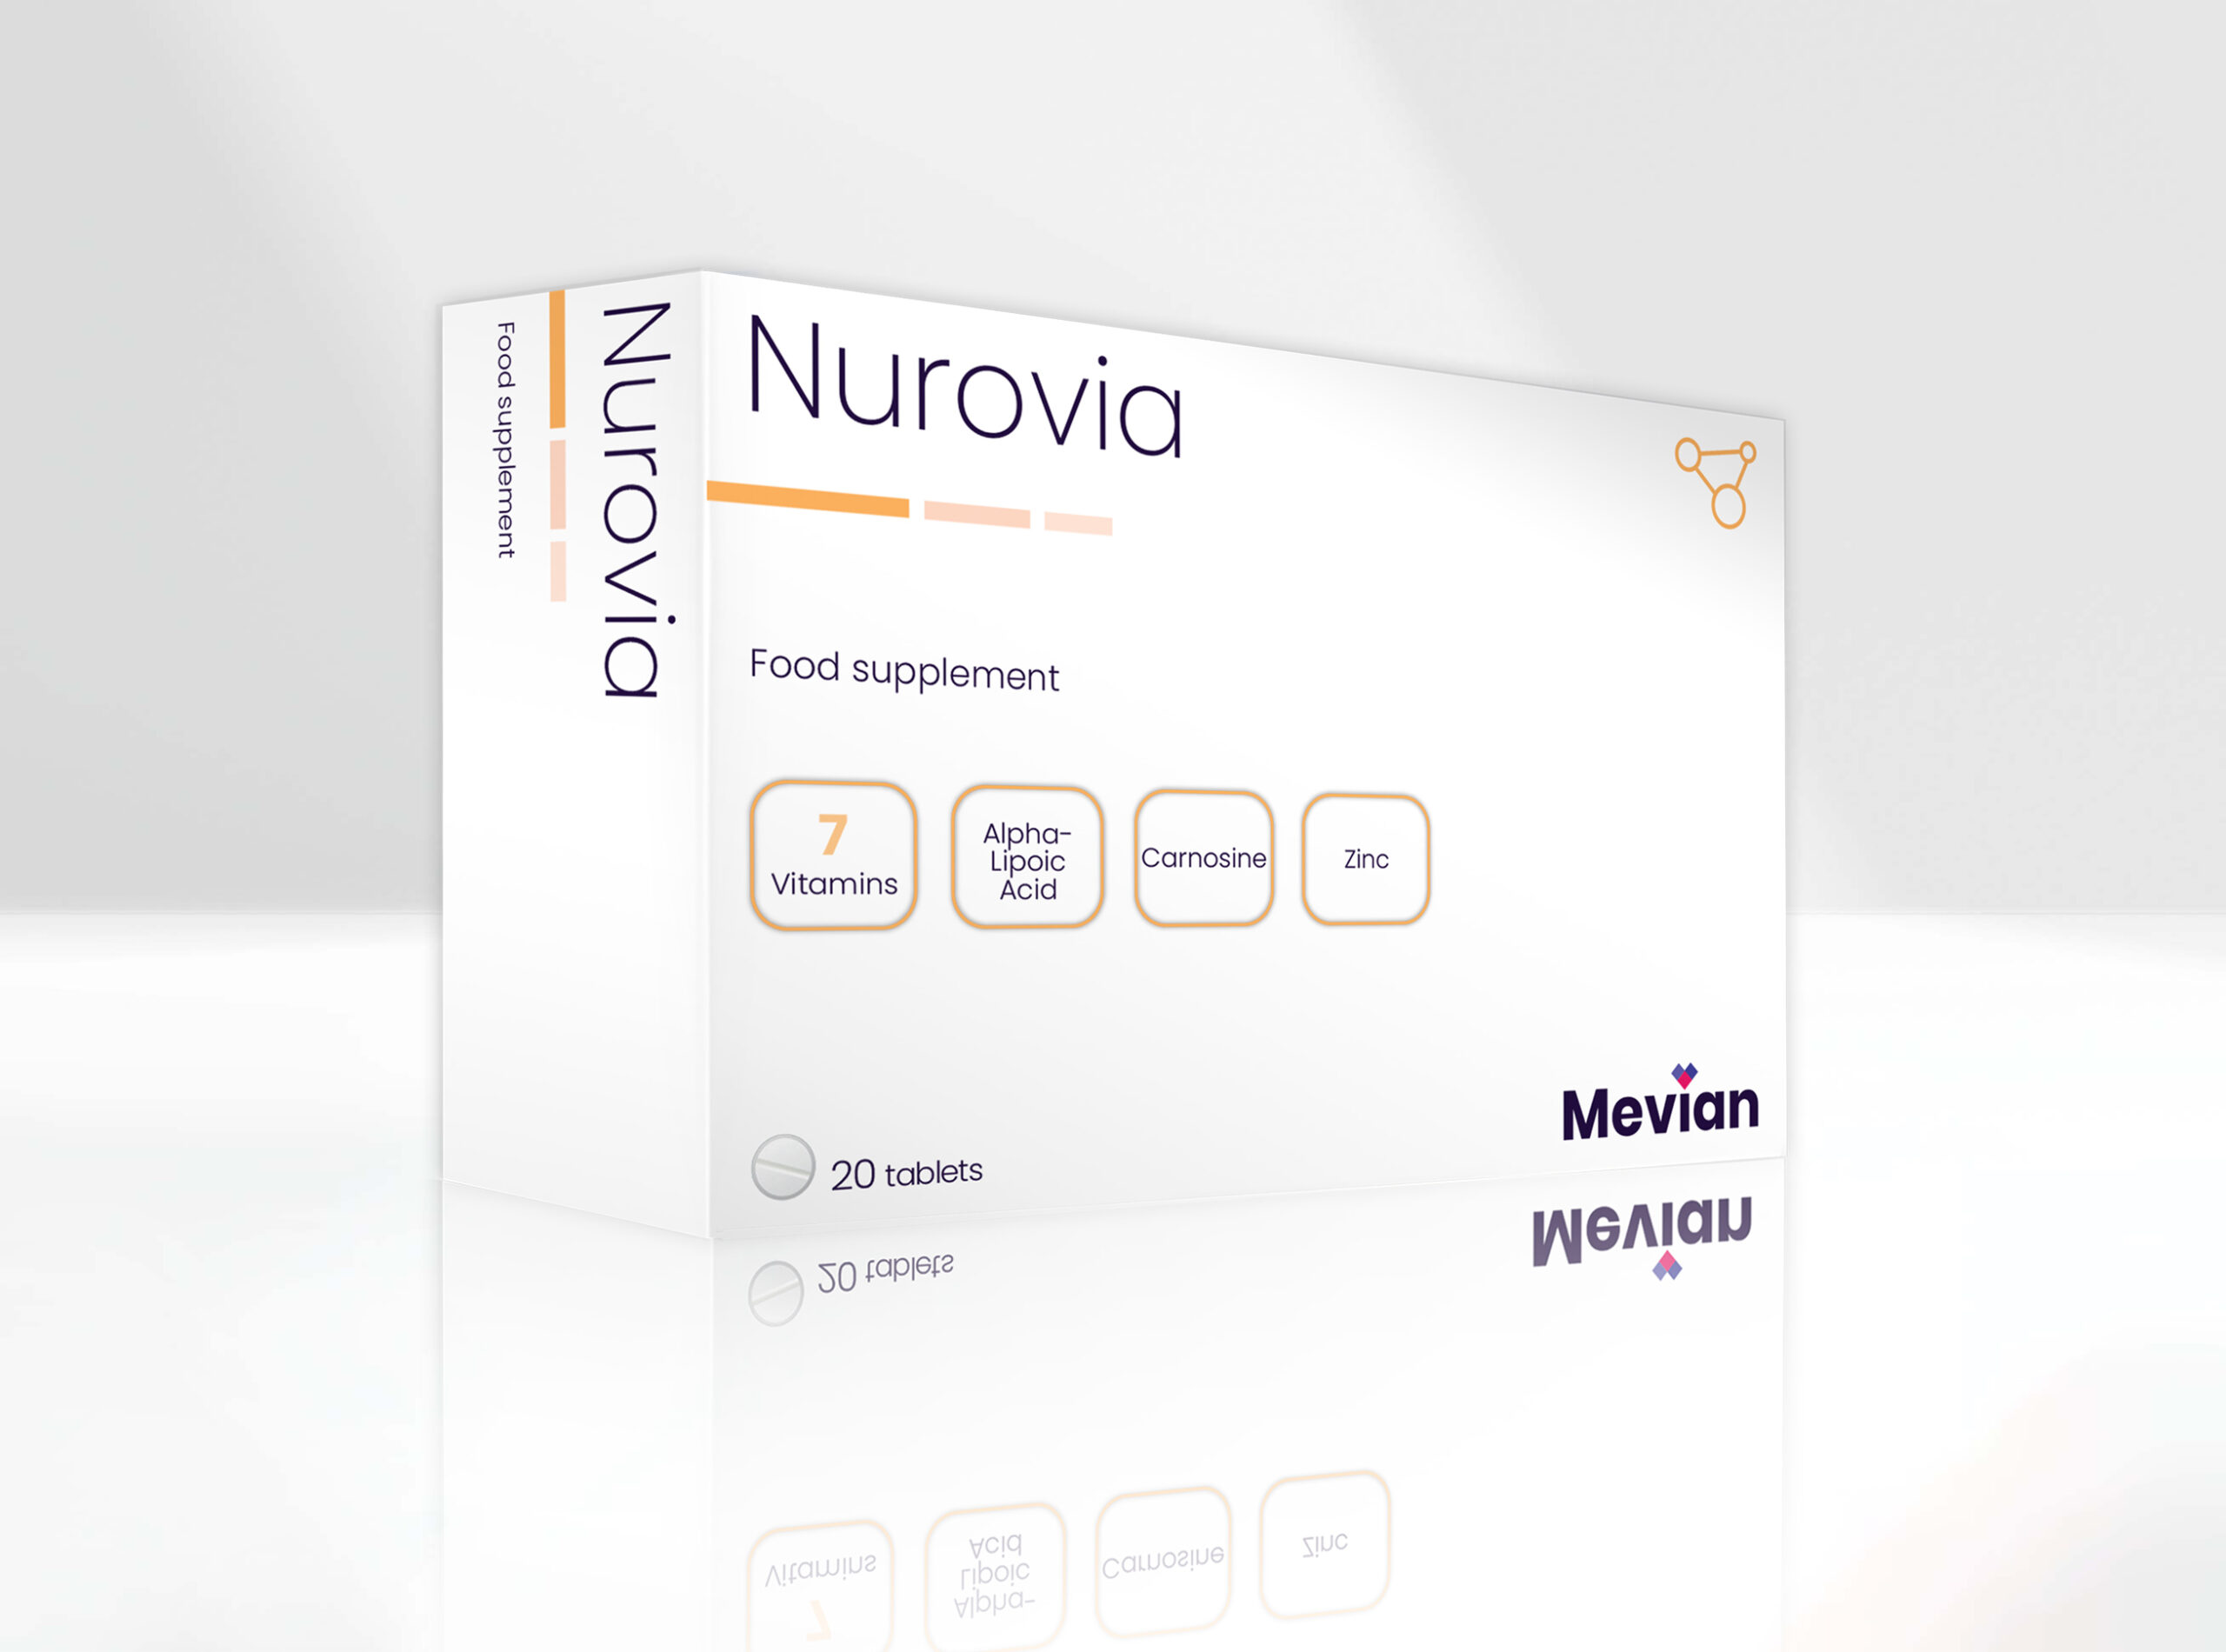 Nurovia is ideal for supporting central and peripheral neuropathies and normal functioning of the nervous system.